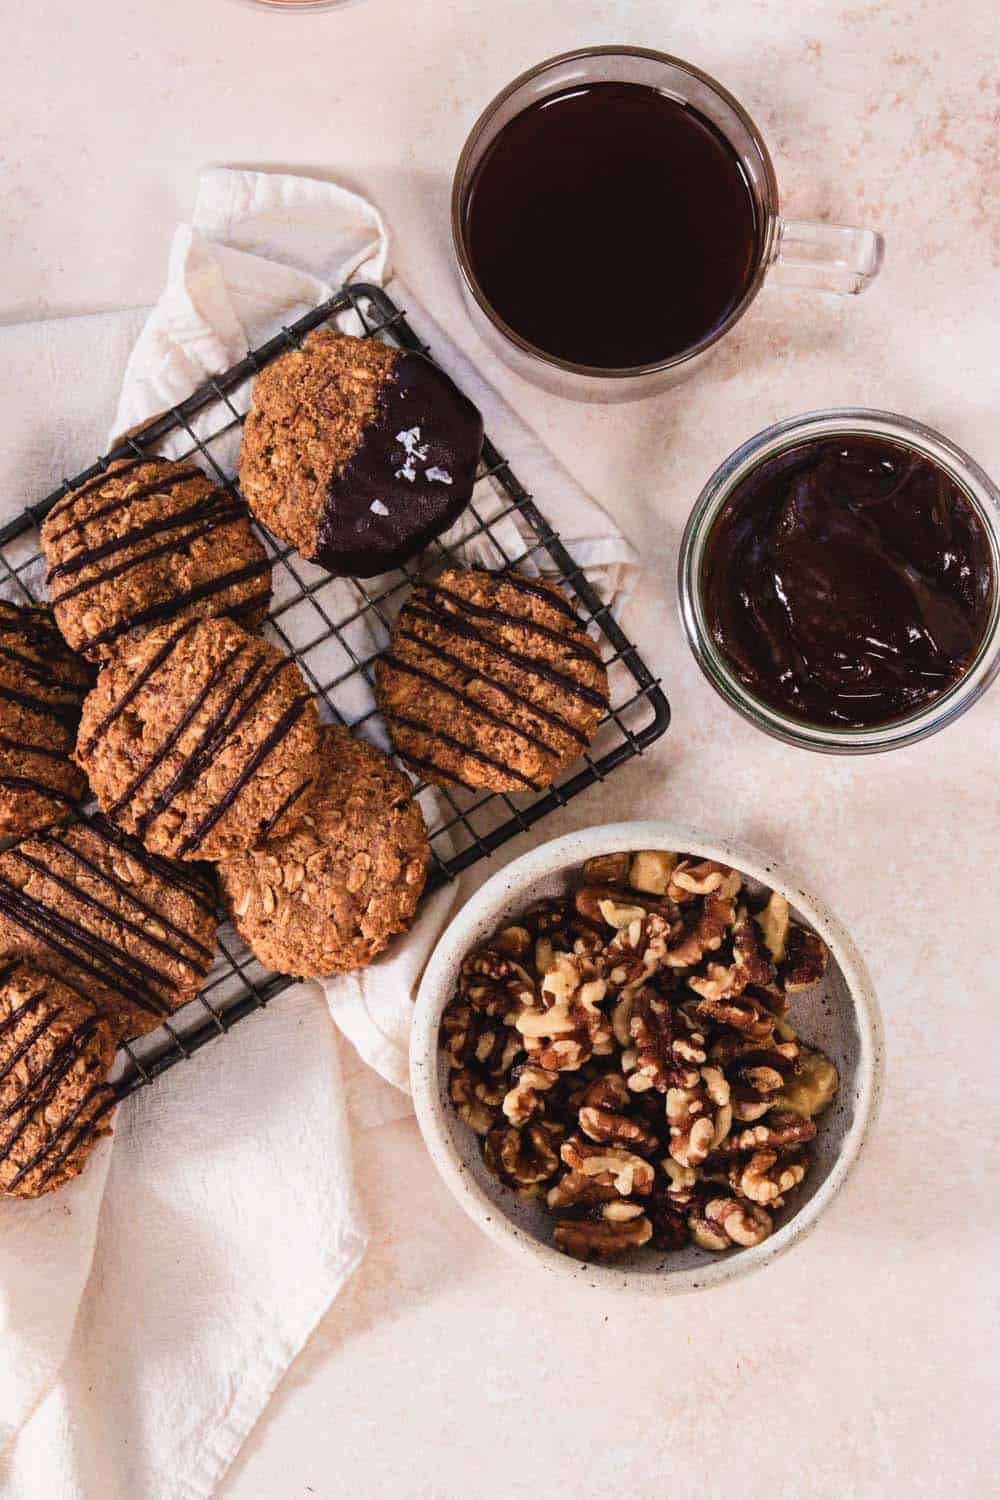 A bowl of walnuts, prune puree, and a mug of coffee next to cookies.